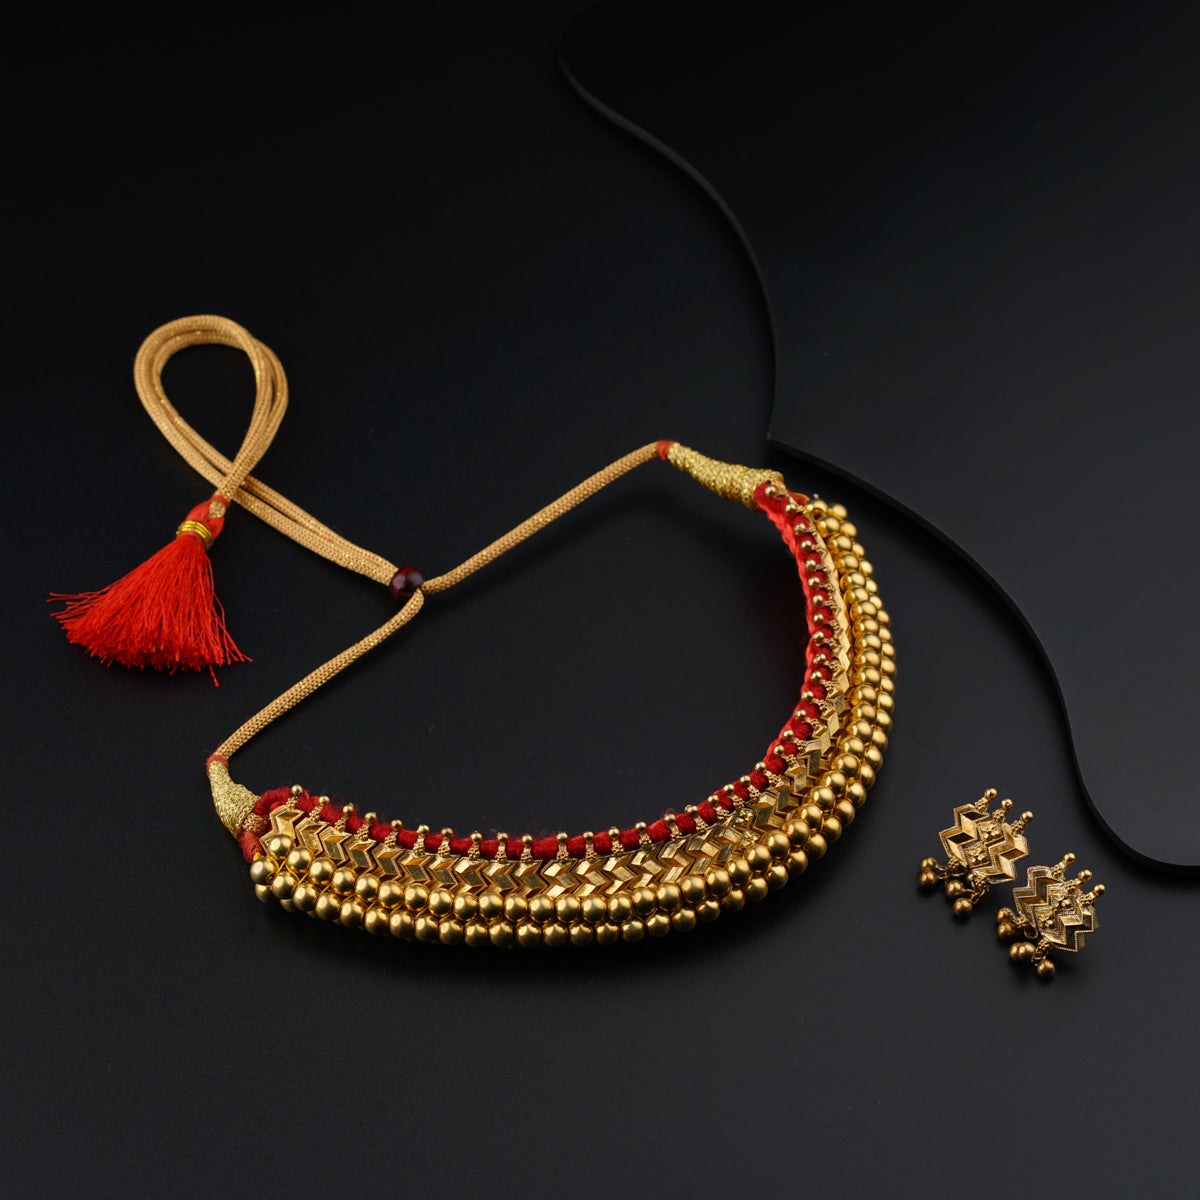 a gold necklace with red beads and a red tassel